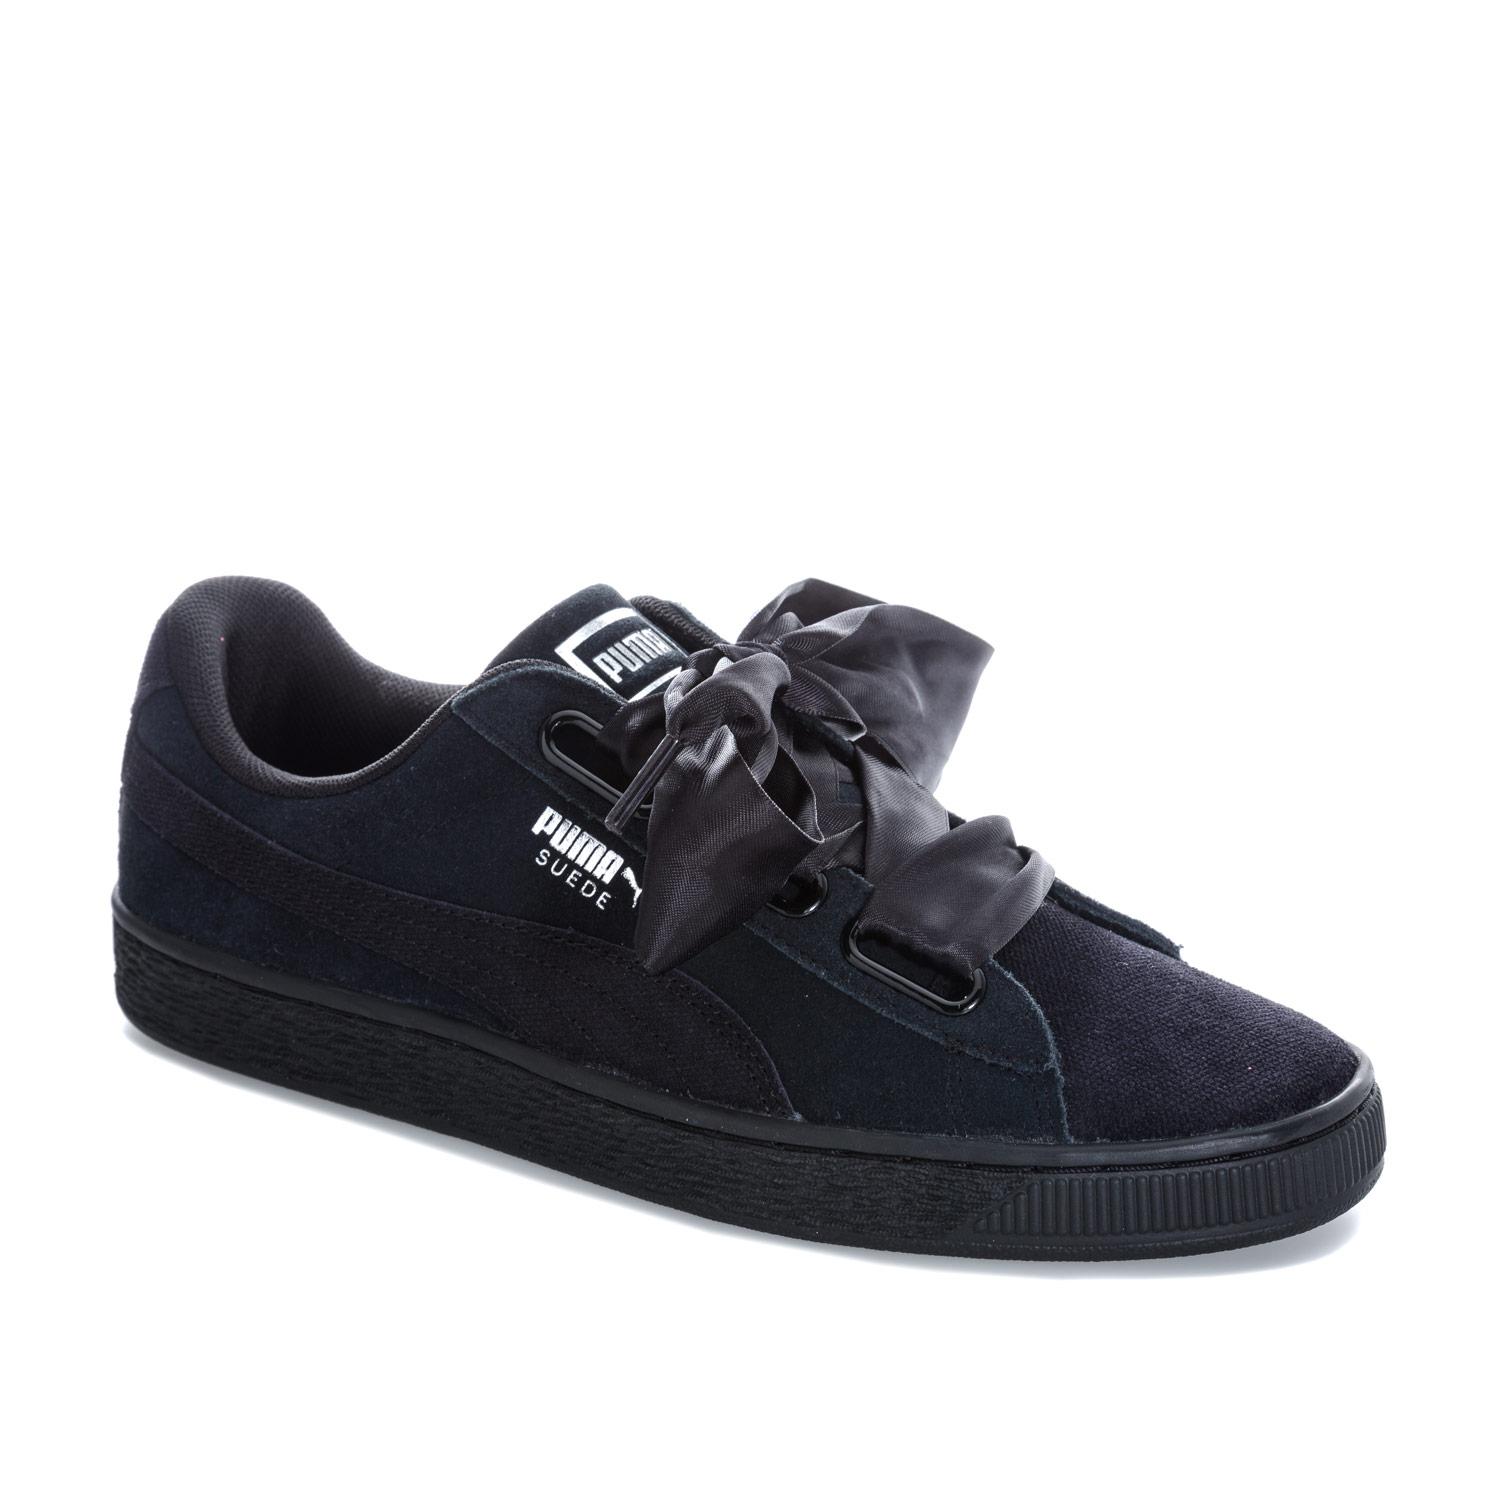 PUMA Suede Heart Pebble Trainers in Black - Lyst